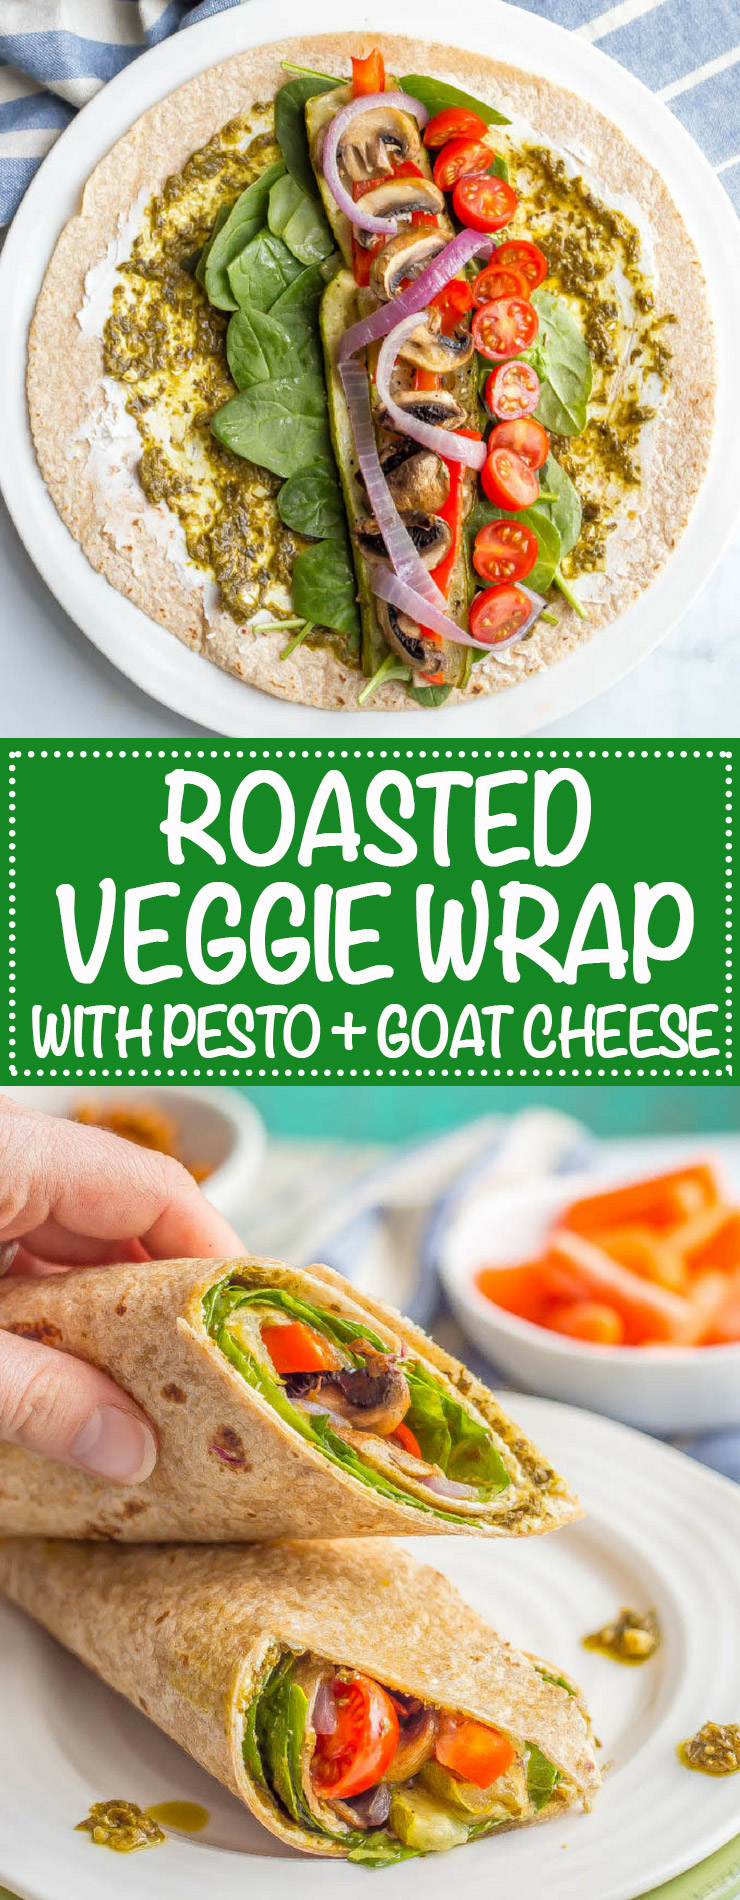 Roasted veggie wrap with pesto and goat cheese Family